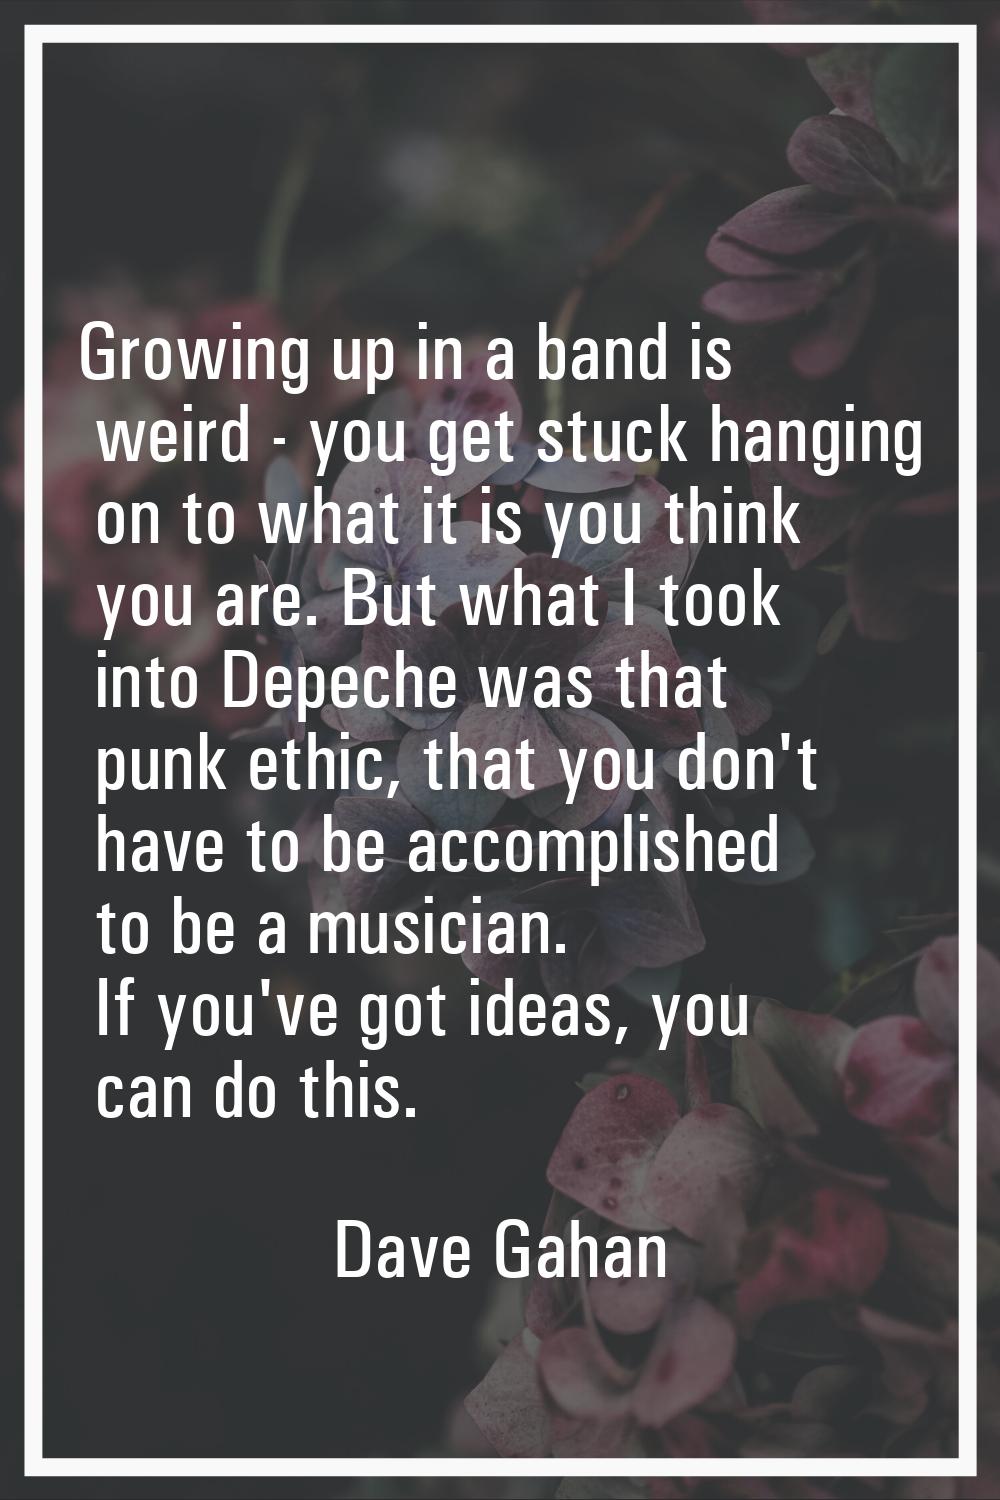 Growing up in a band is weird - you get stuck hanging on to what it is you think you are. But what 